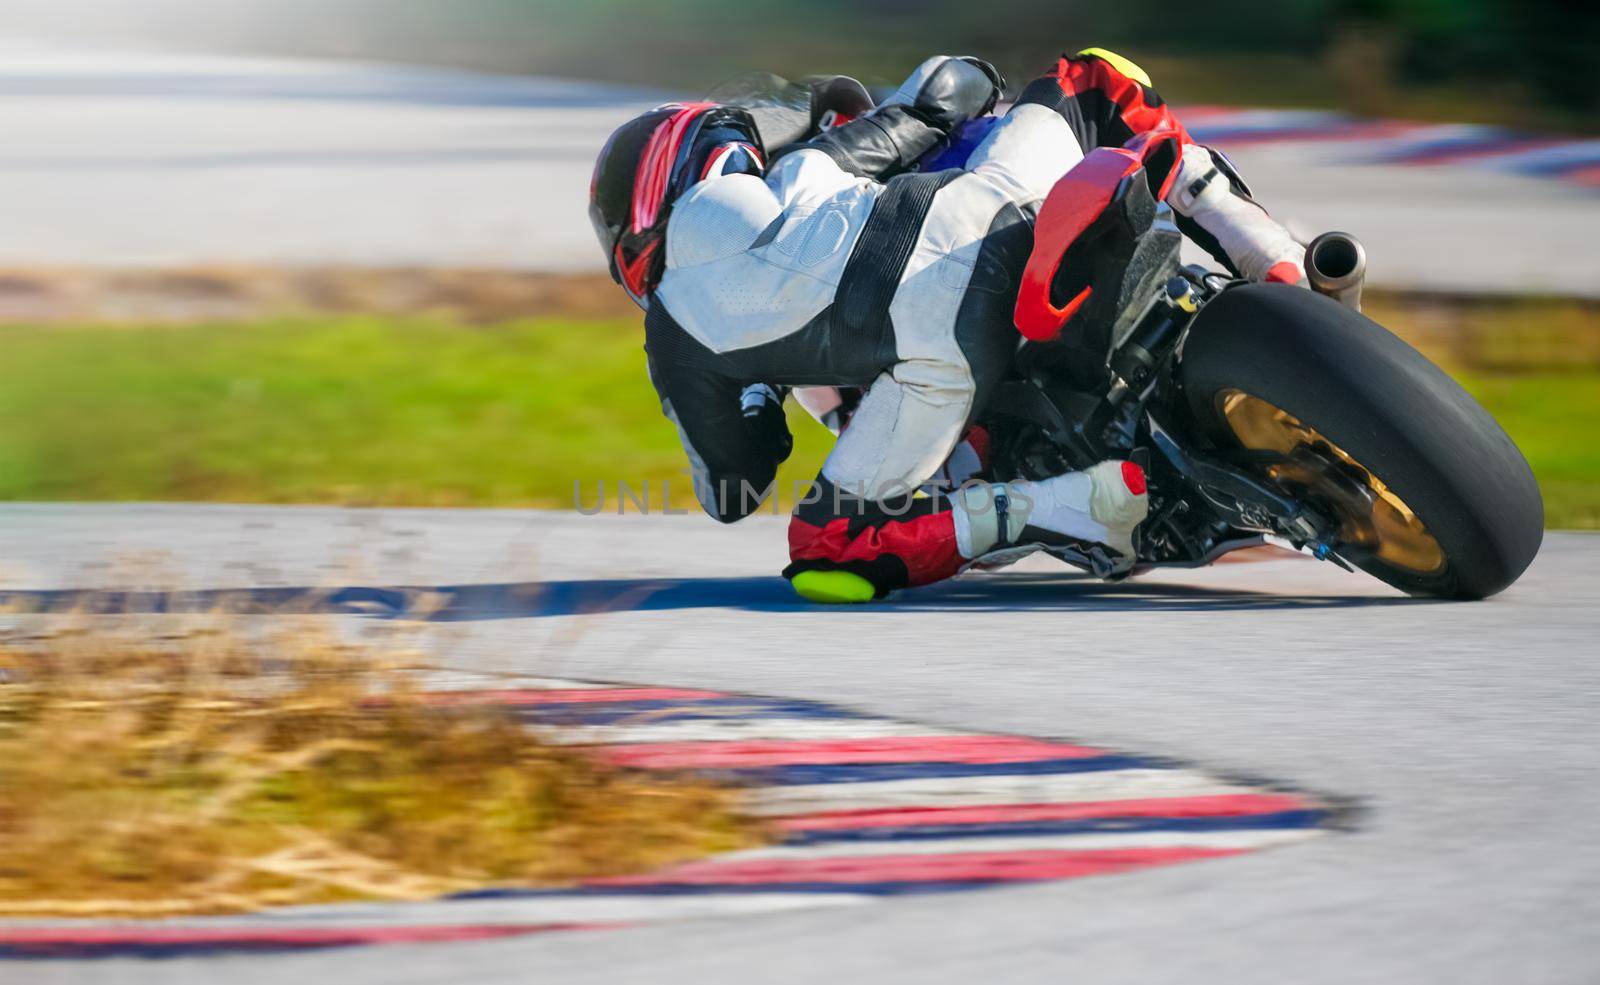 Motorcycle leaning into a fast corner on race track by toa55